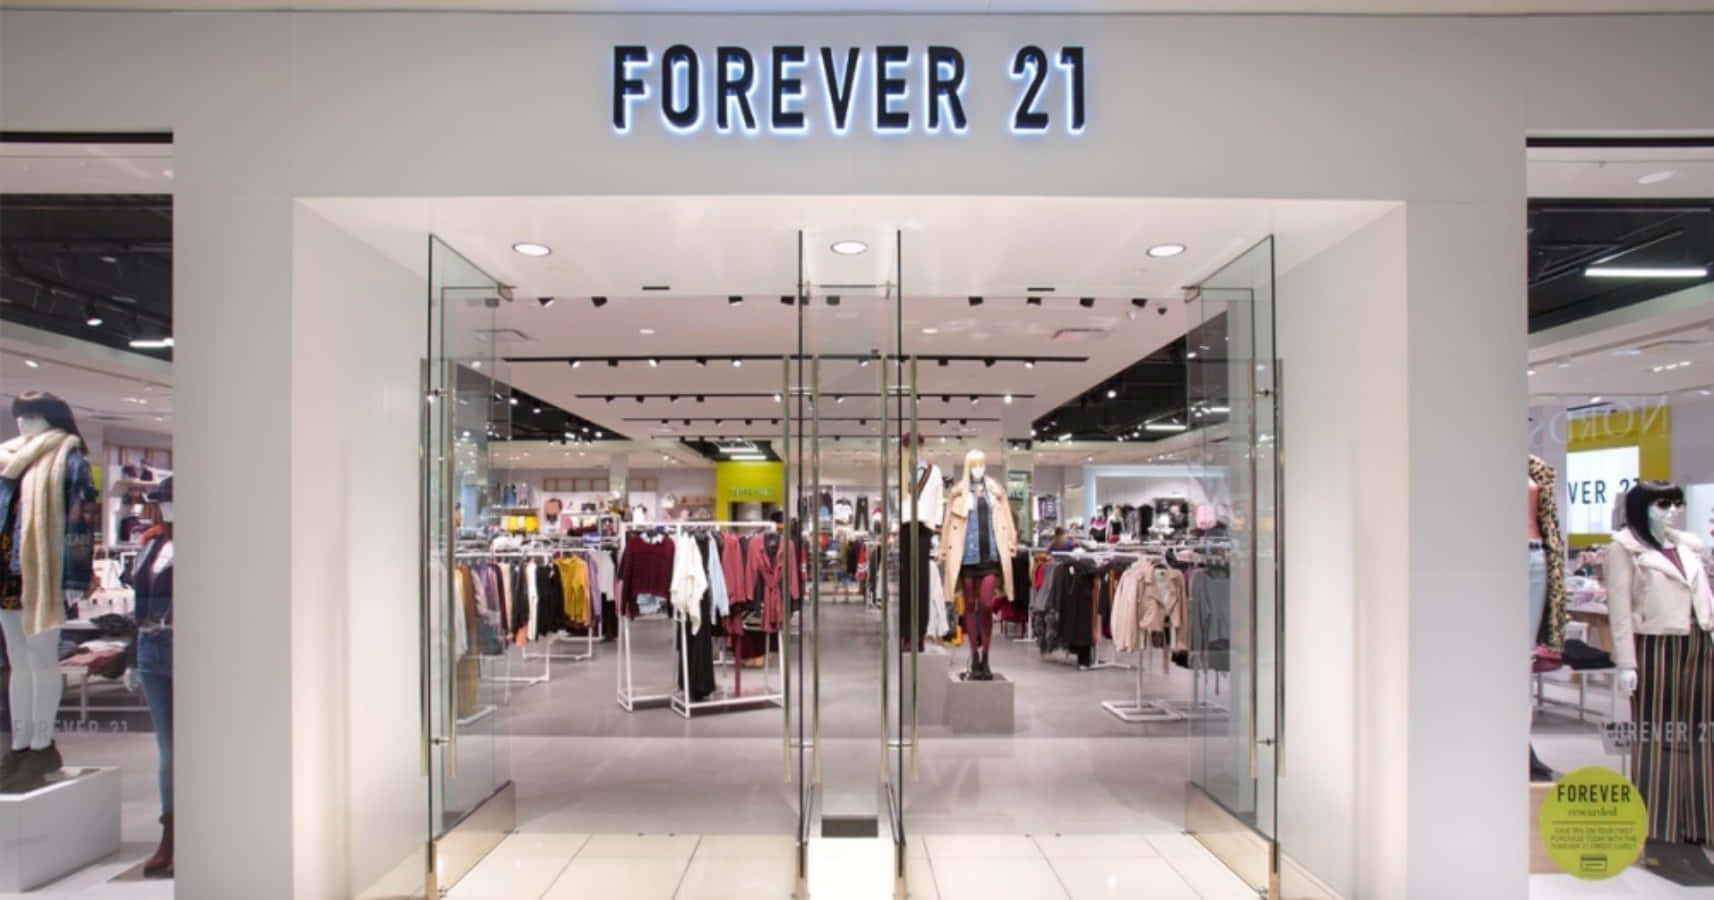 Style for Every Occasion with trendy fashion from Forever 21